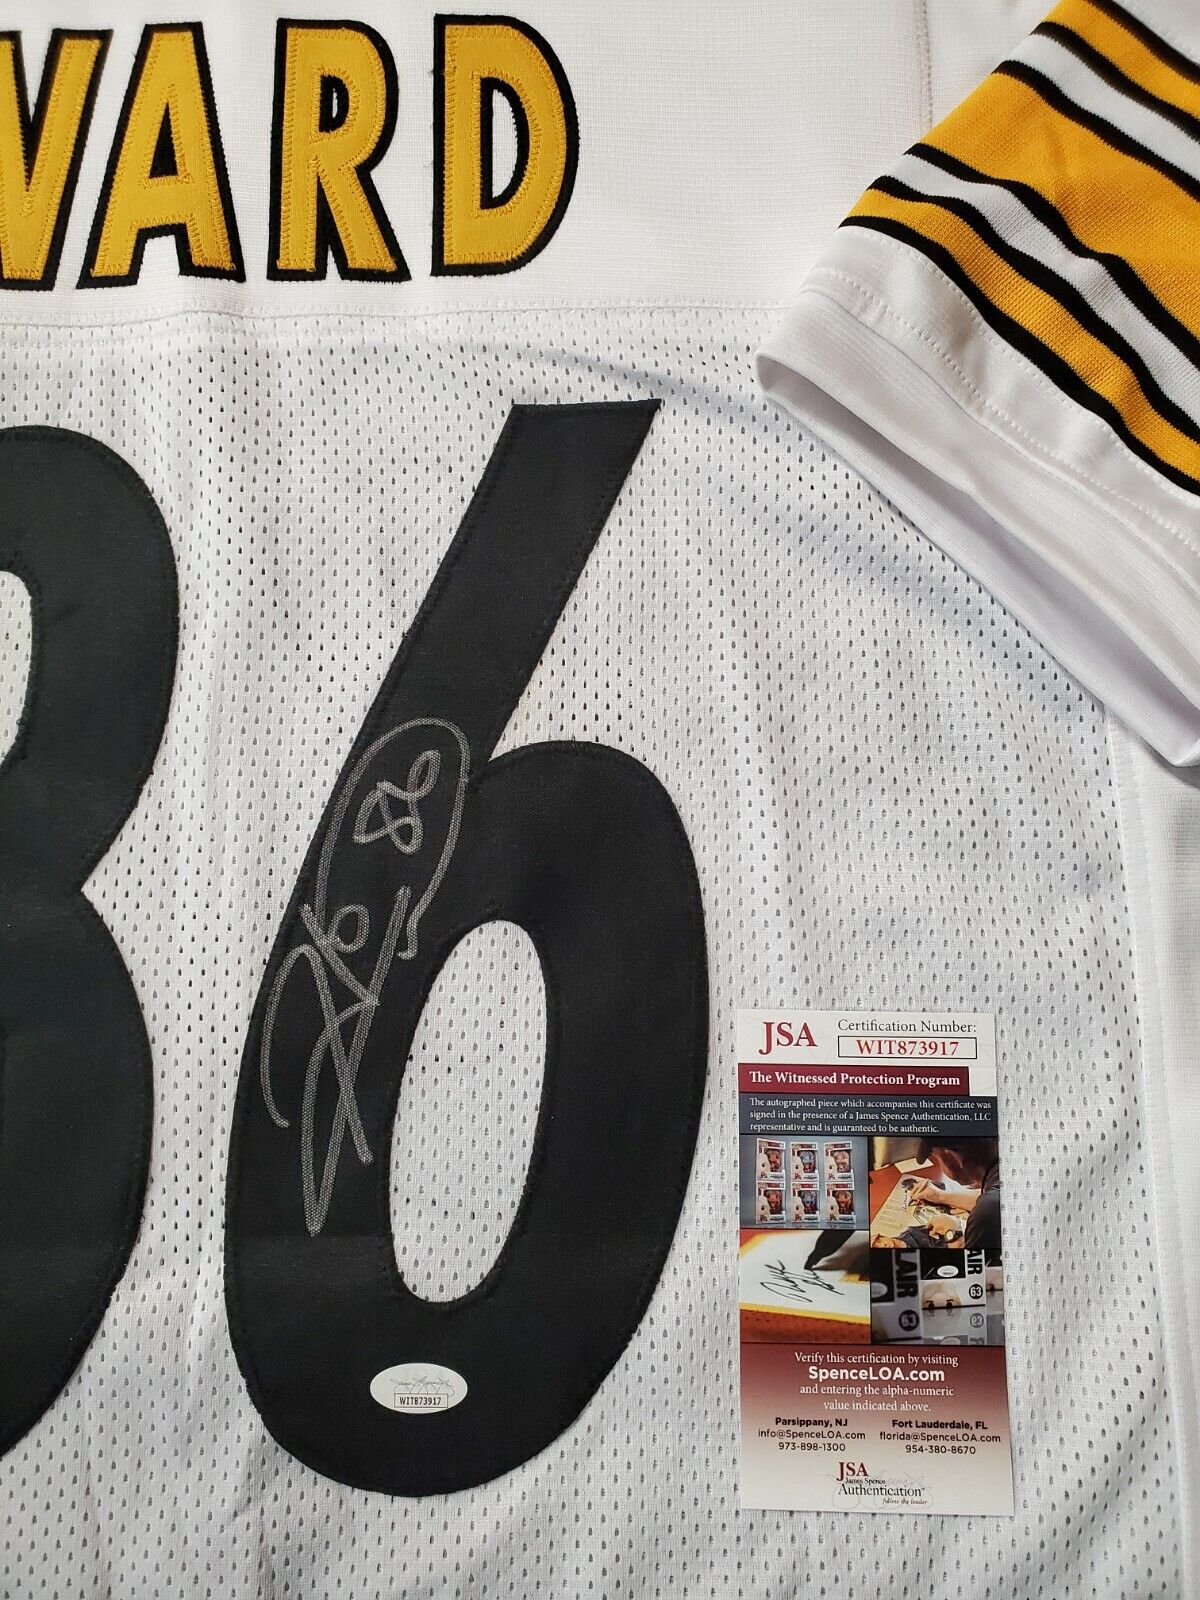 MVP Authentics Pittsburgh Steelers Hines Ward Autographed Signed Jersey Jsa  Coa 126 sports jersey framing , jersey framing